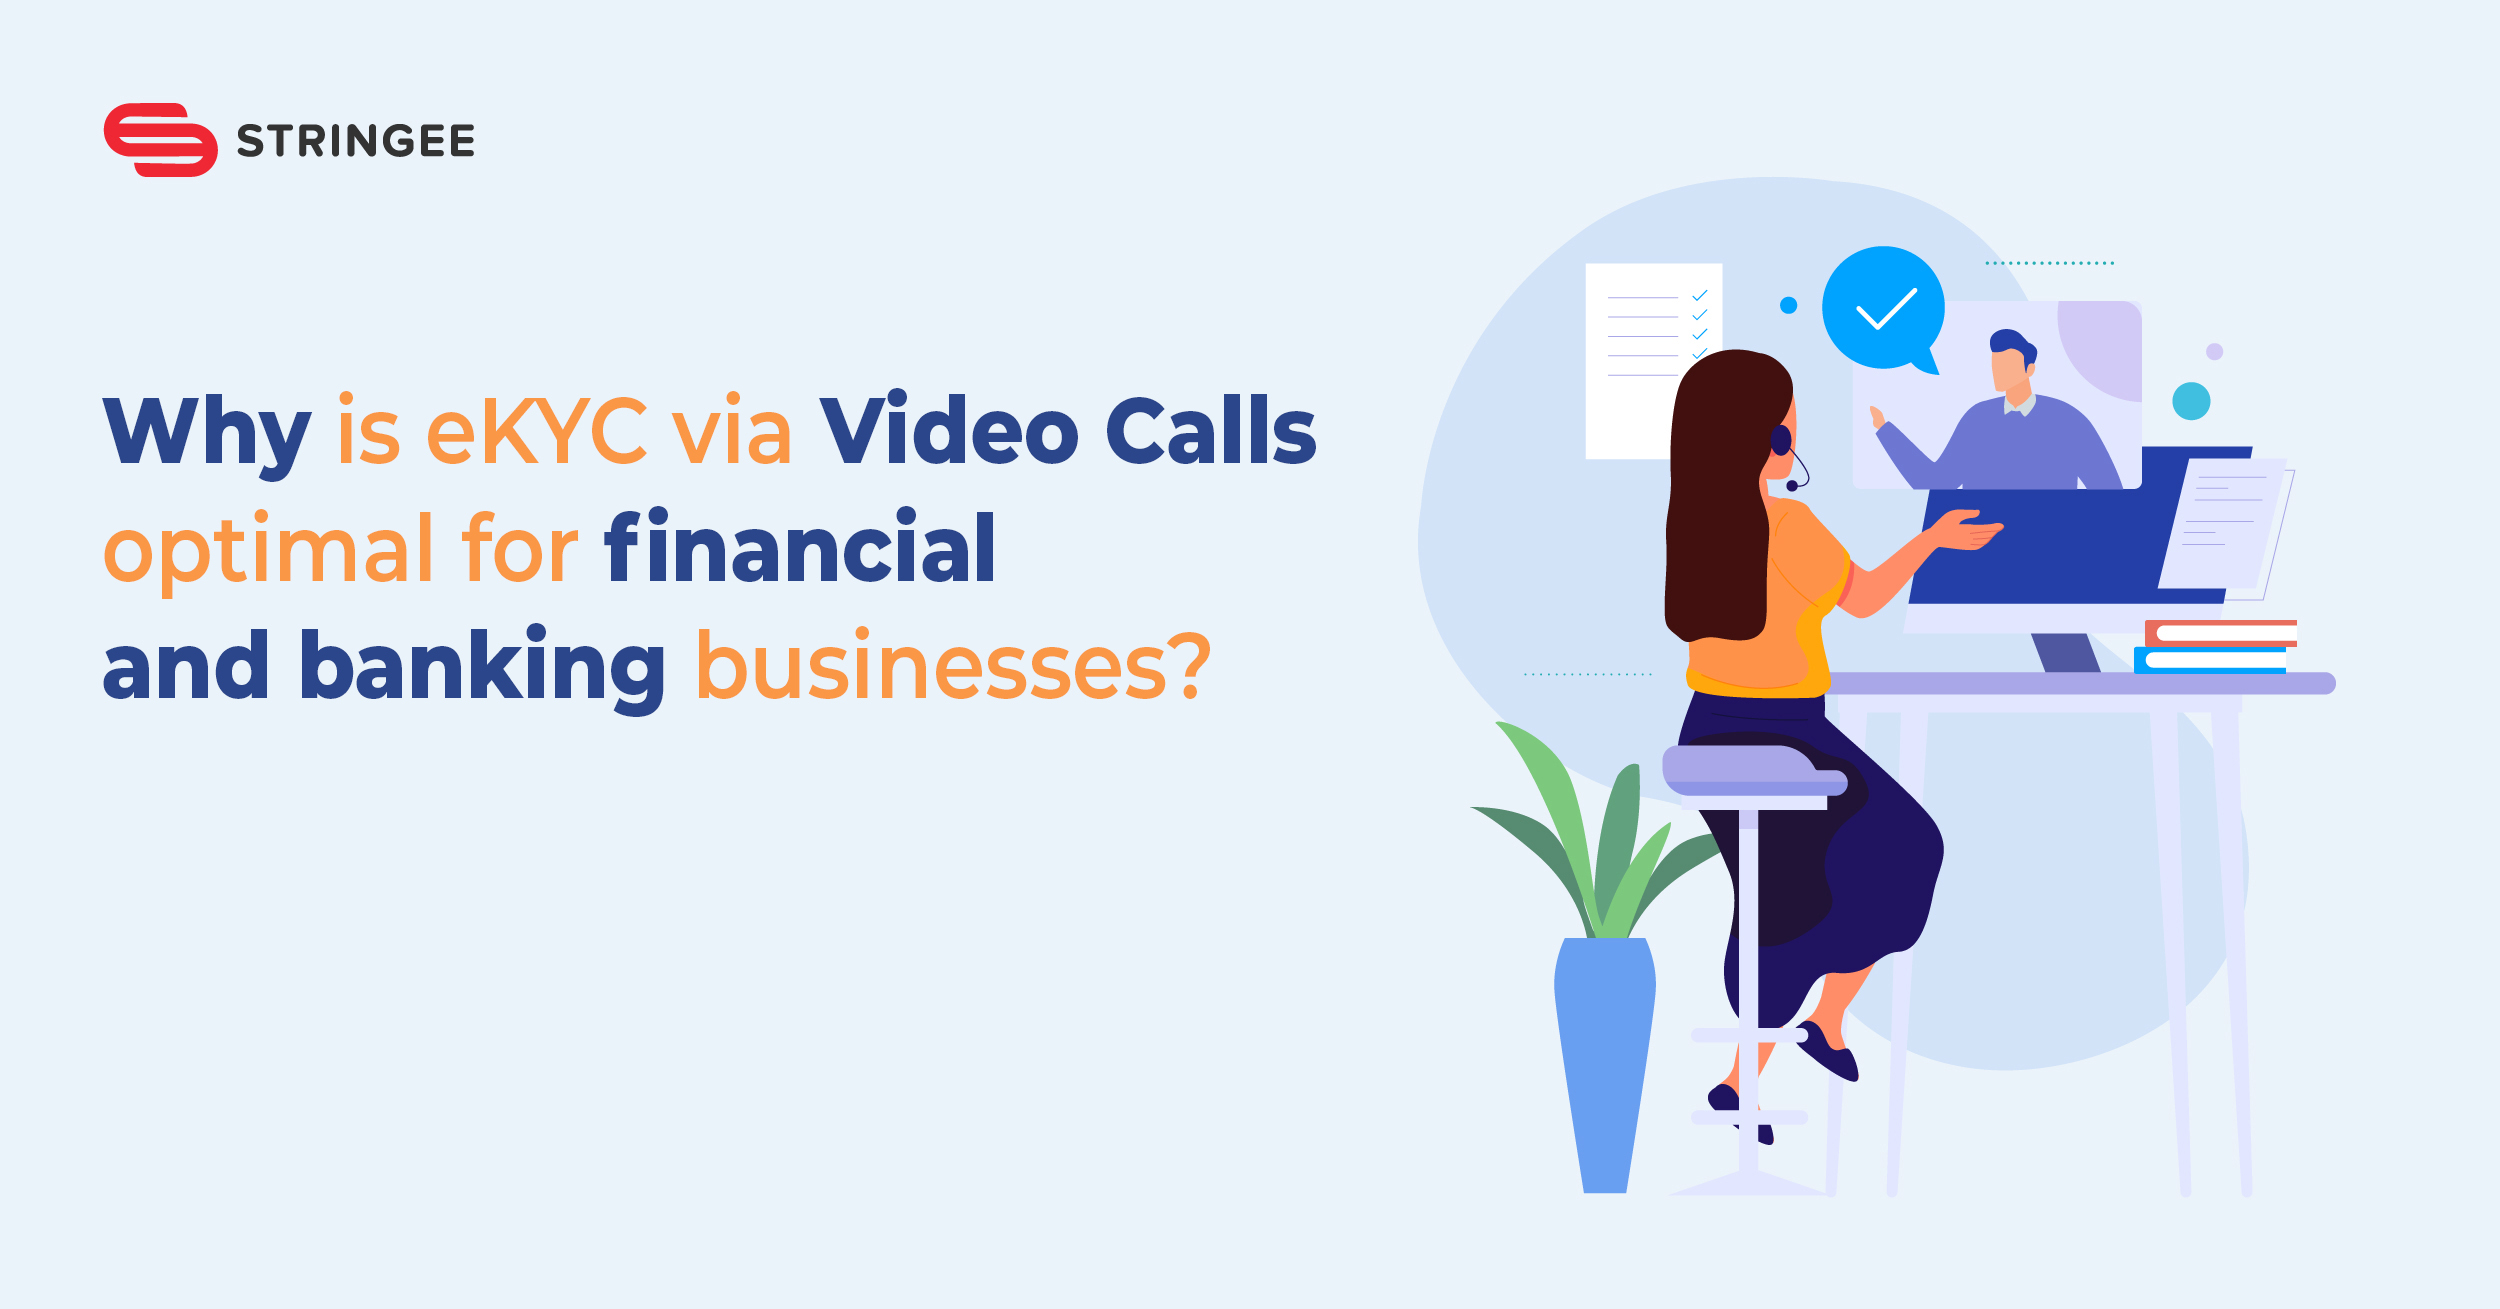 Why is eKYC via Video Calls optimal for financial and banking businesses?